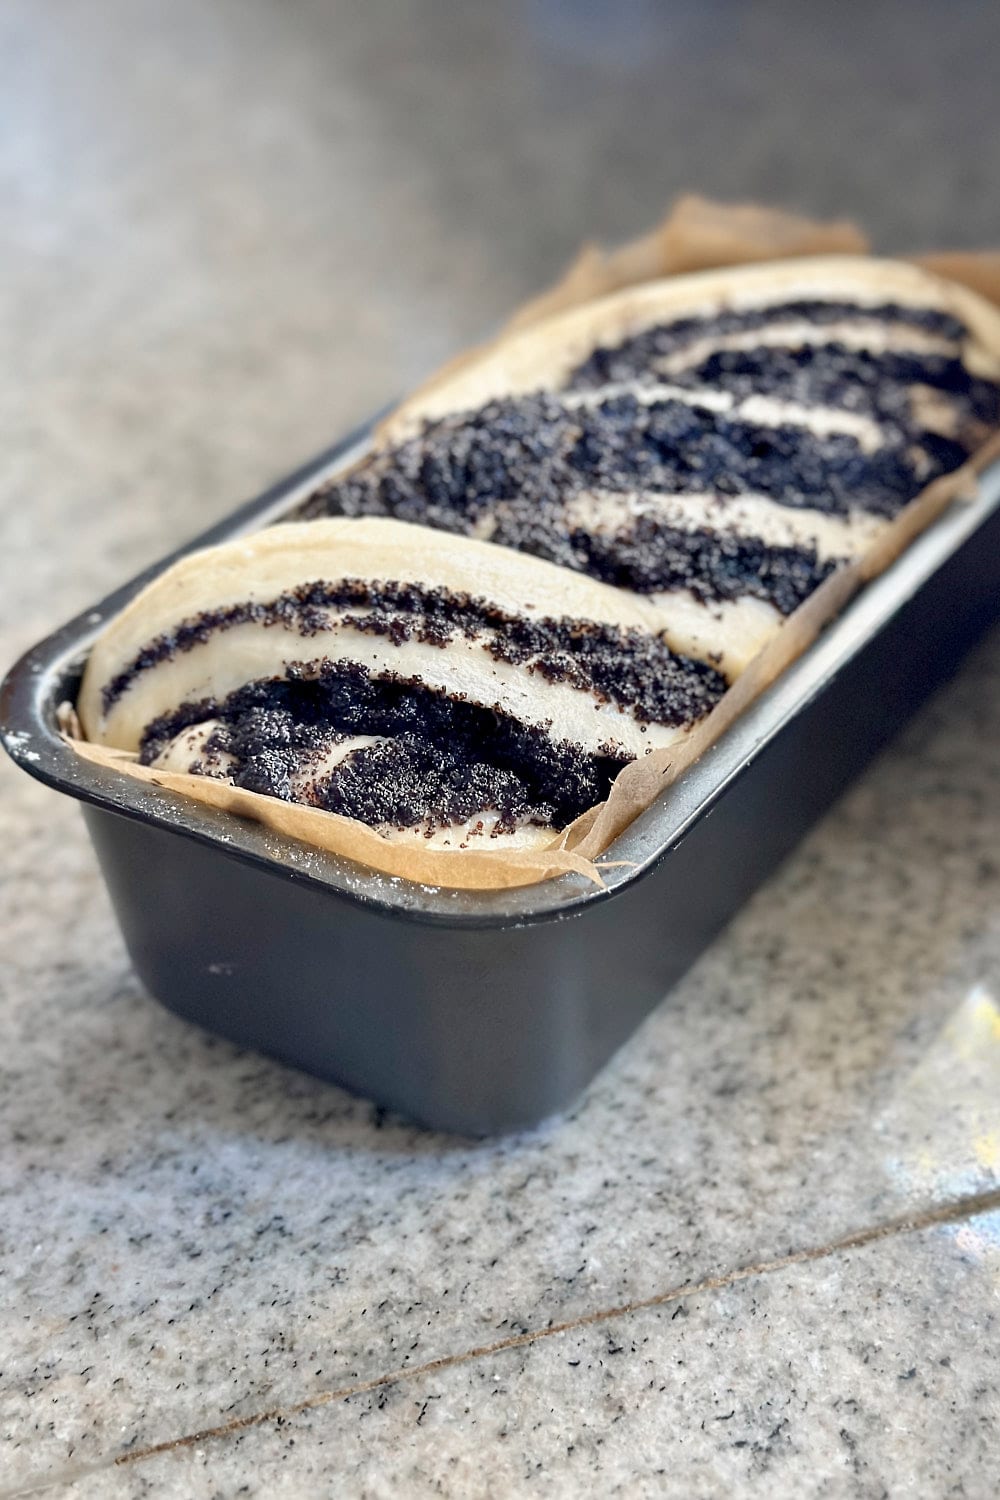 Shaped and fully proofed sourdough babka rising slightly above the rim of the loaf pan.